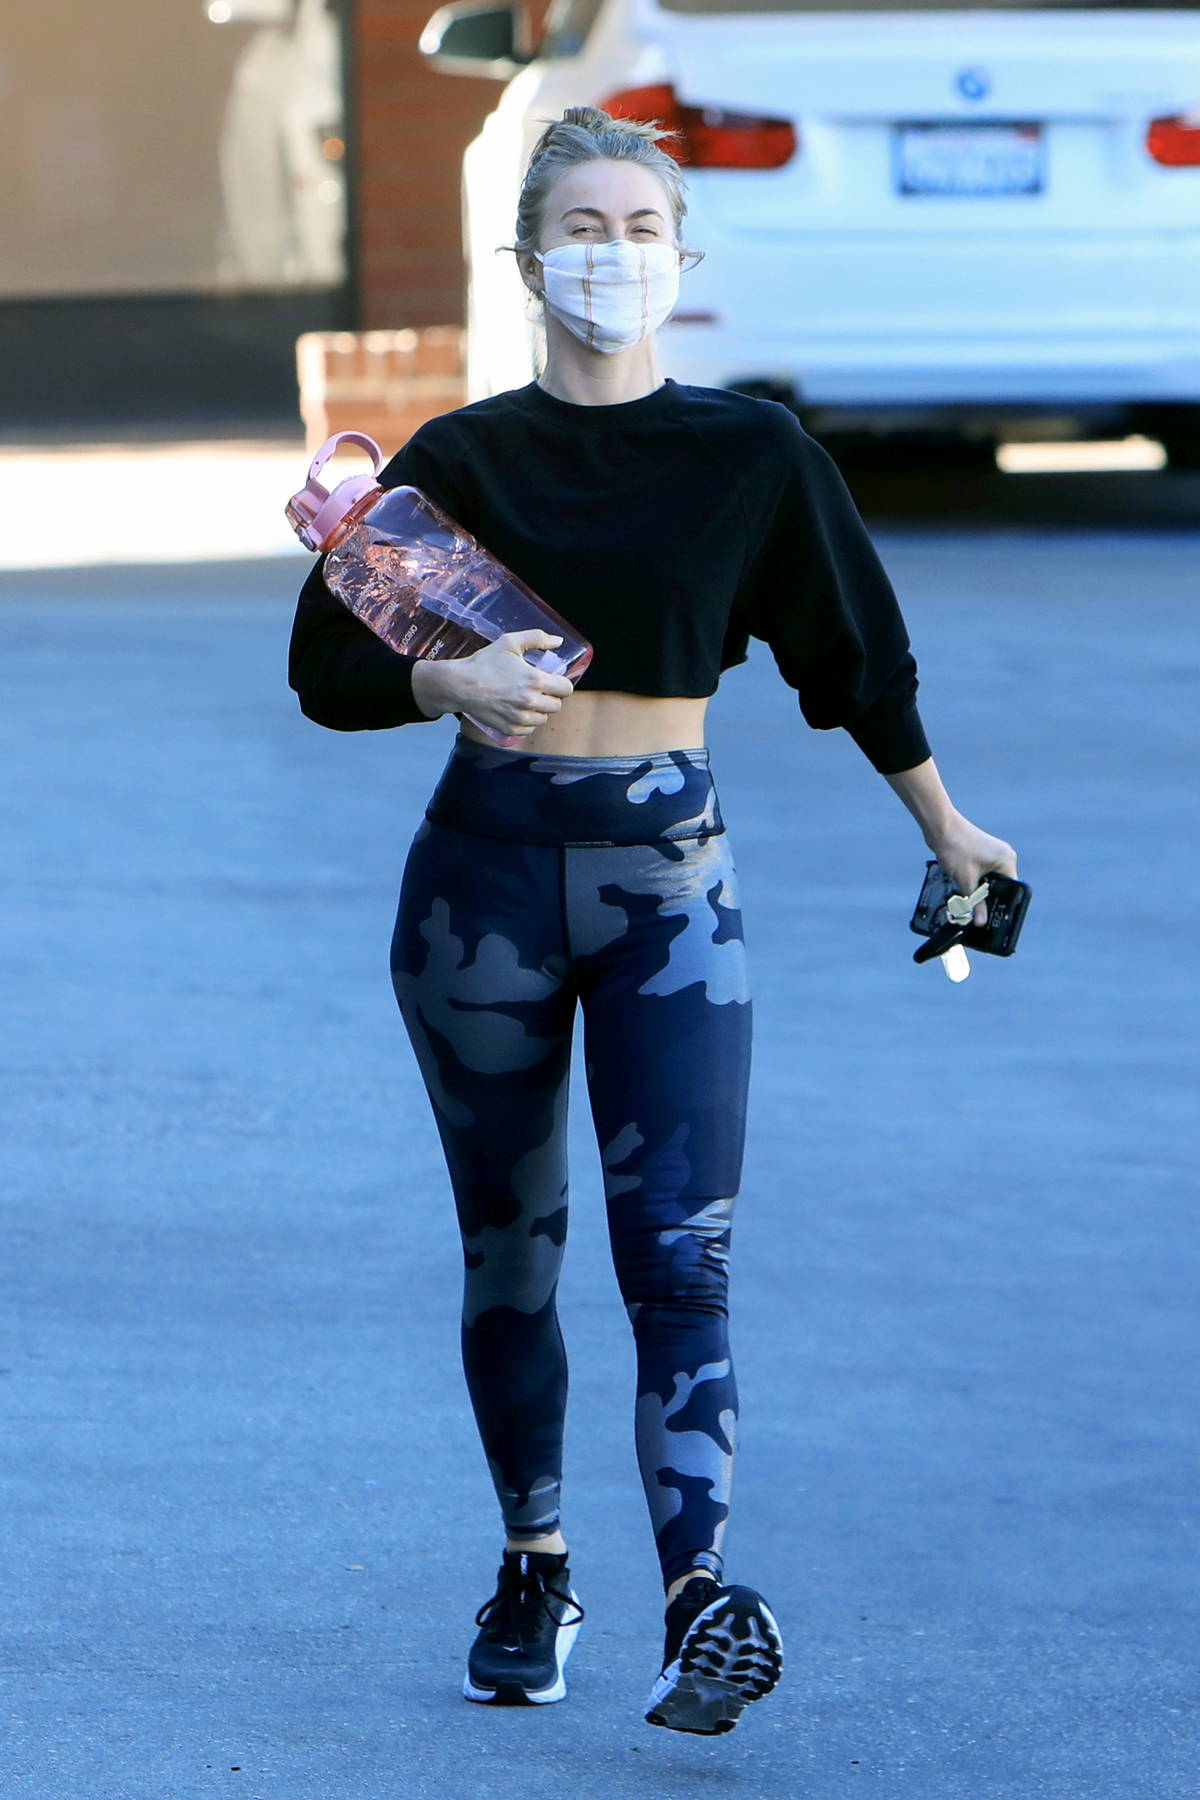 Julianne Hough Flaunts Her Enviable Six-Pack Abs For Instagram Followers In  Black Leggings And Matching Sports Bra - SHEfinds